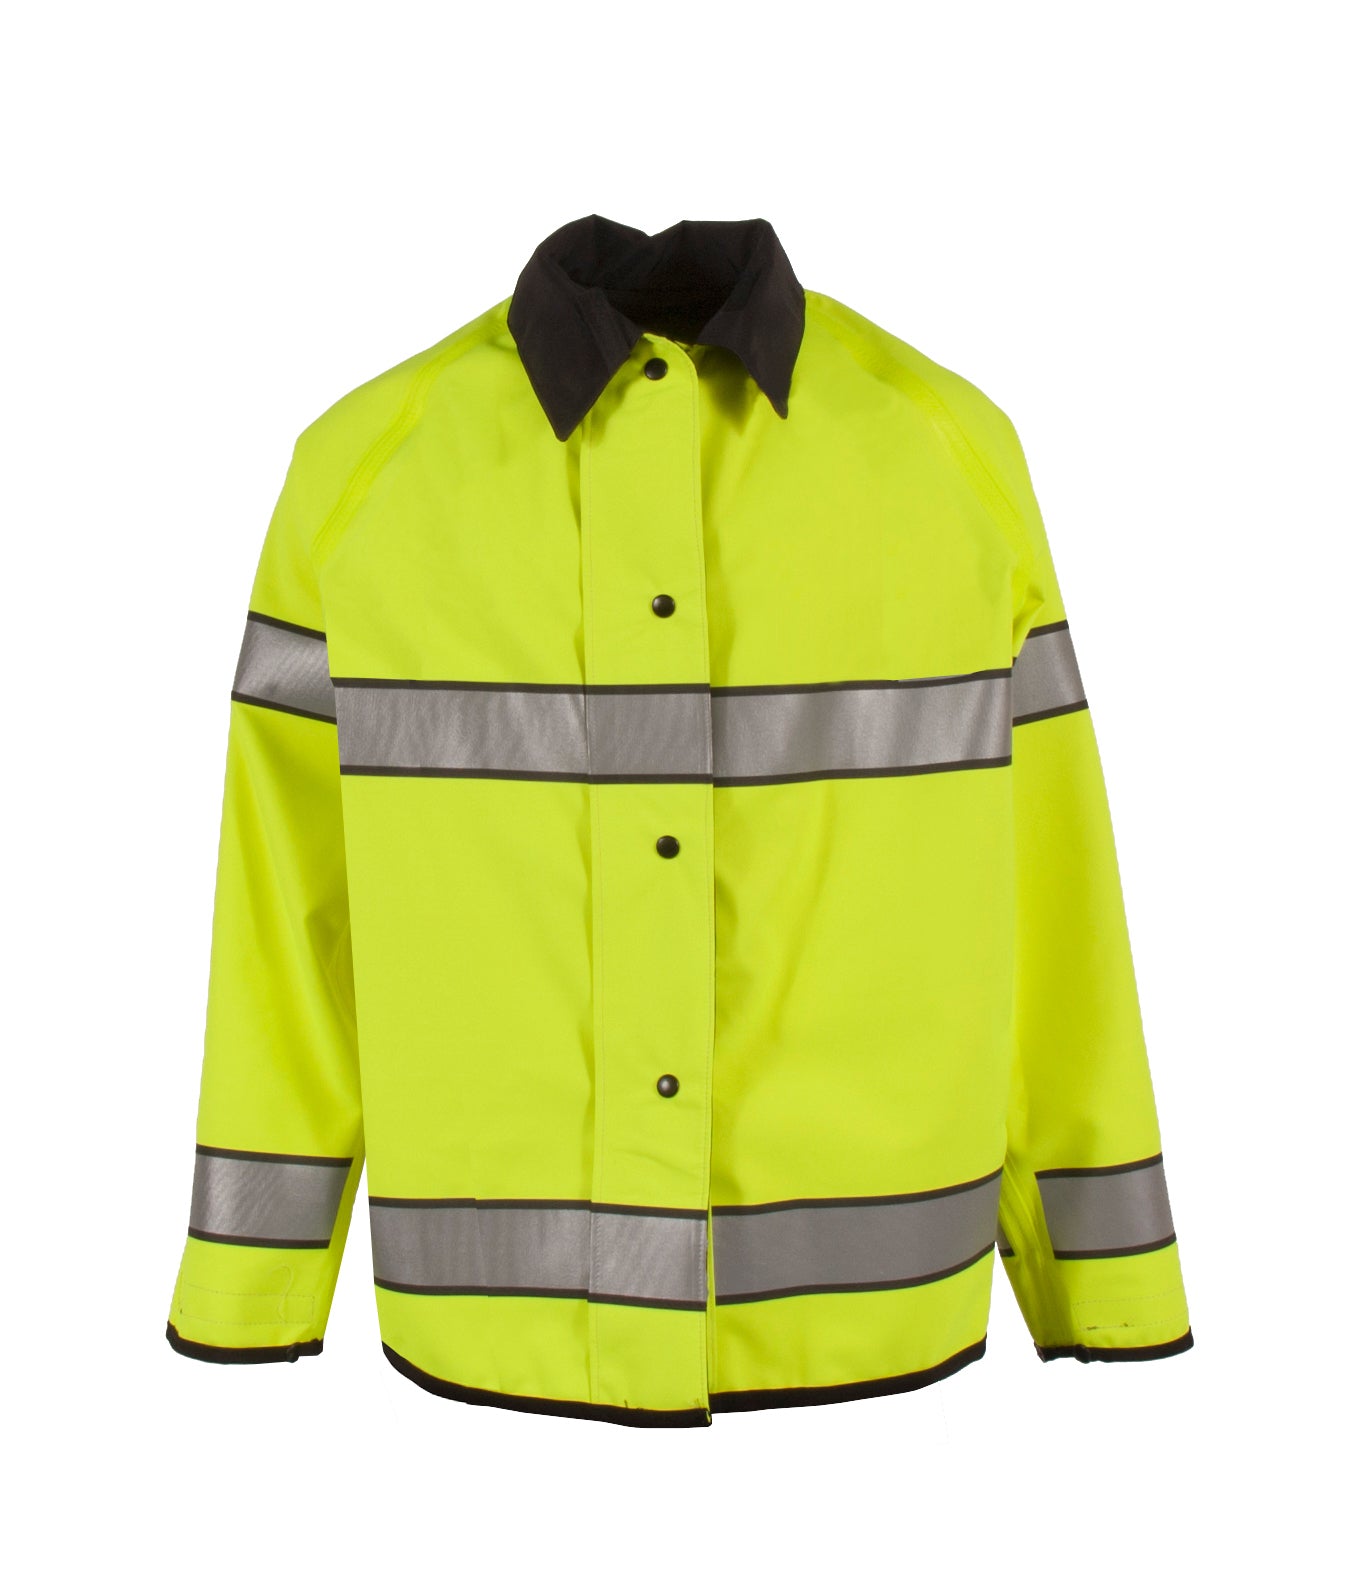 Radians 5010RJH3M Reversible Police Coat with 3M Reflective Taping